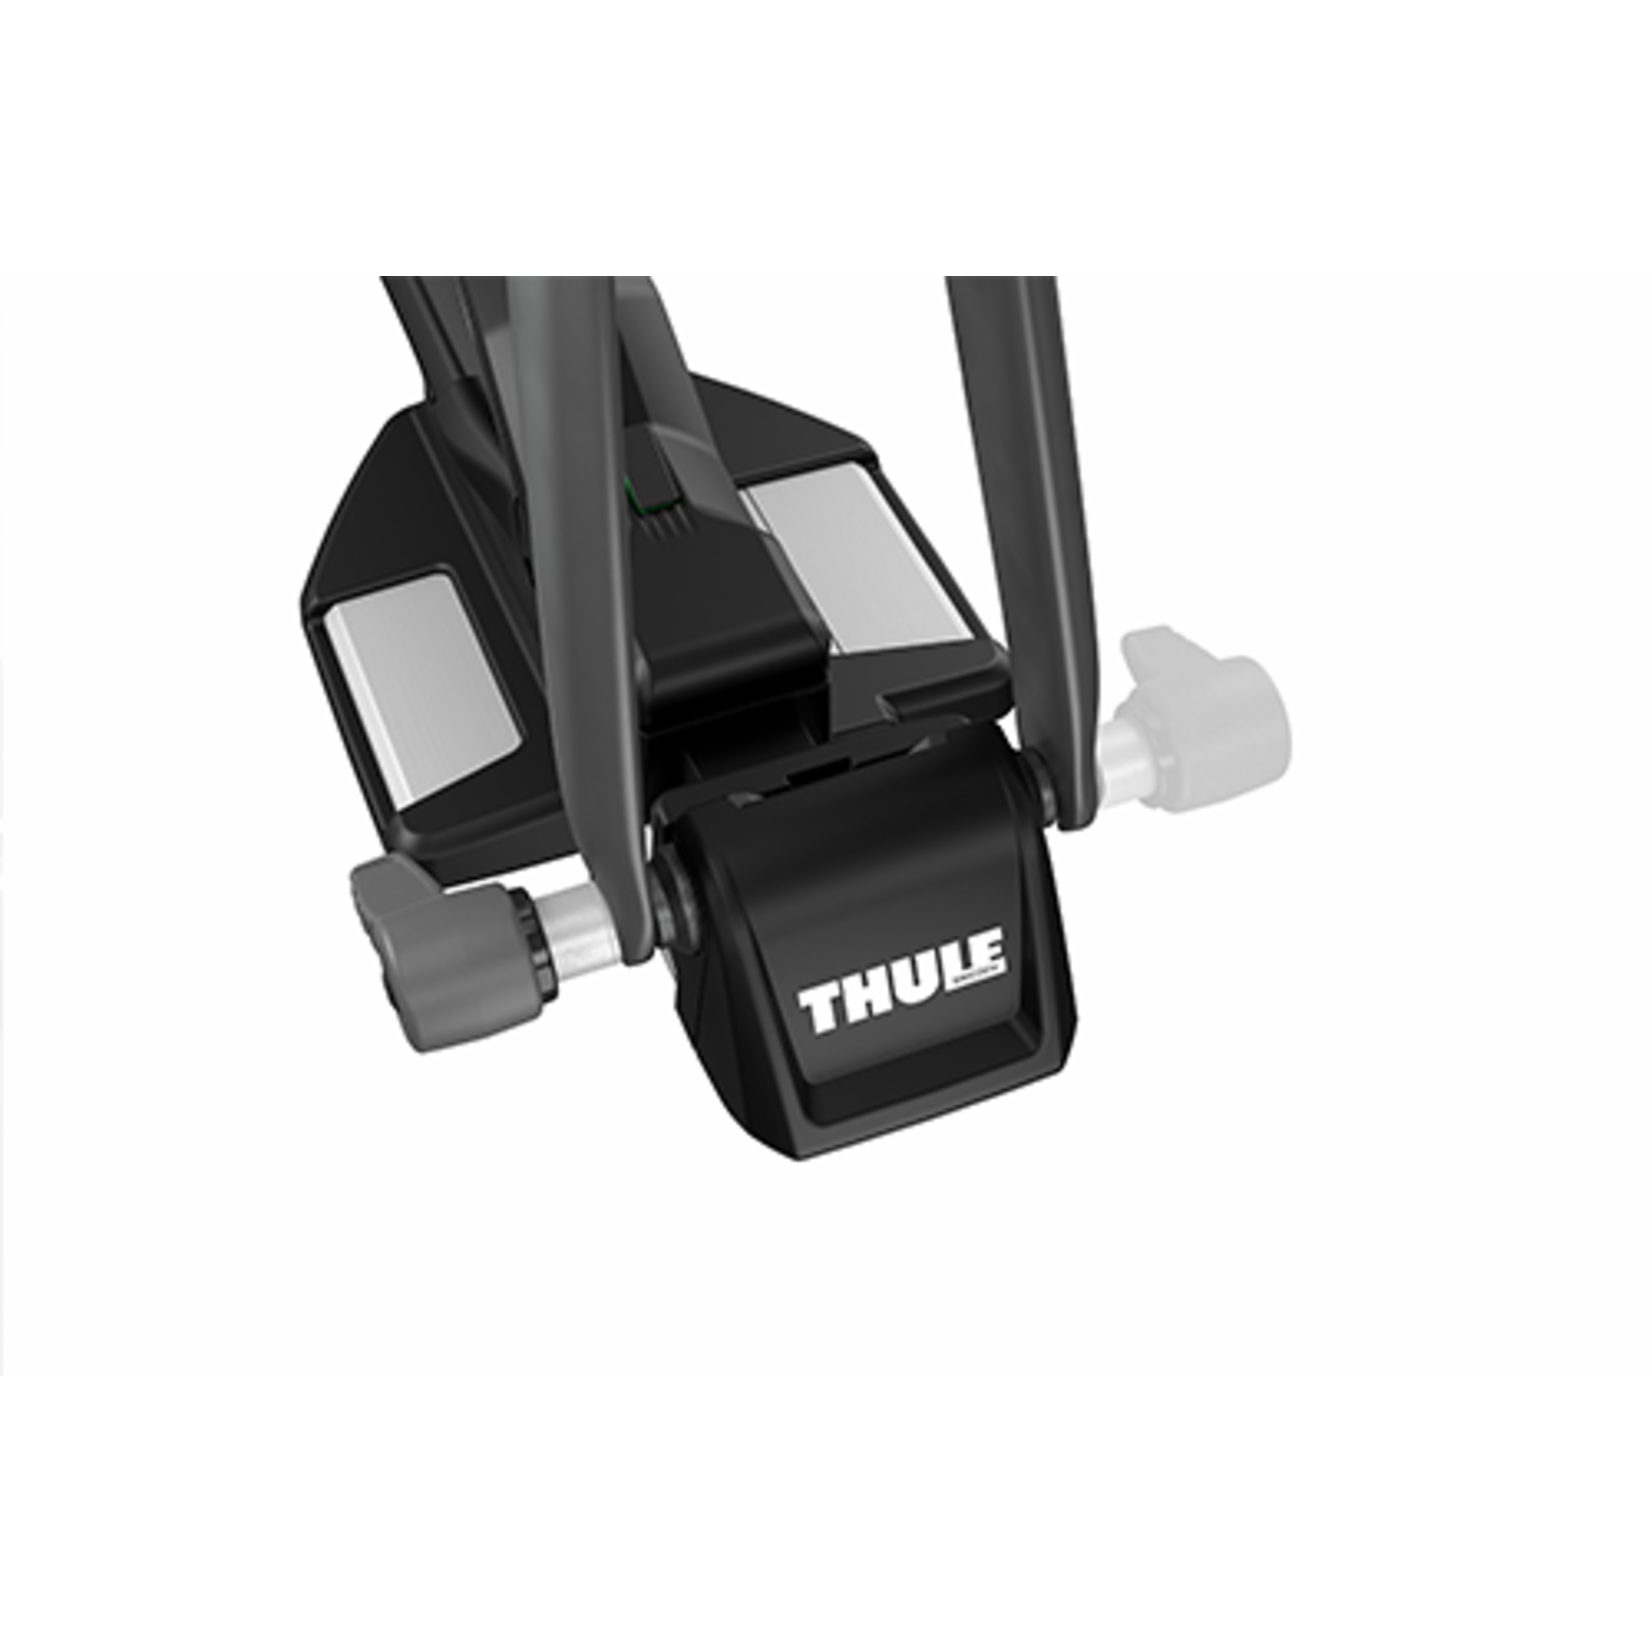 THULE THULE 568 TOP RIDE LOCKING UPRIGHT CARRIER